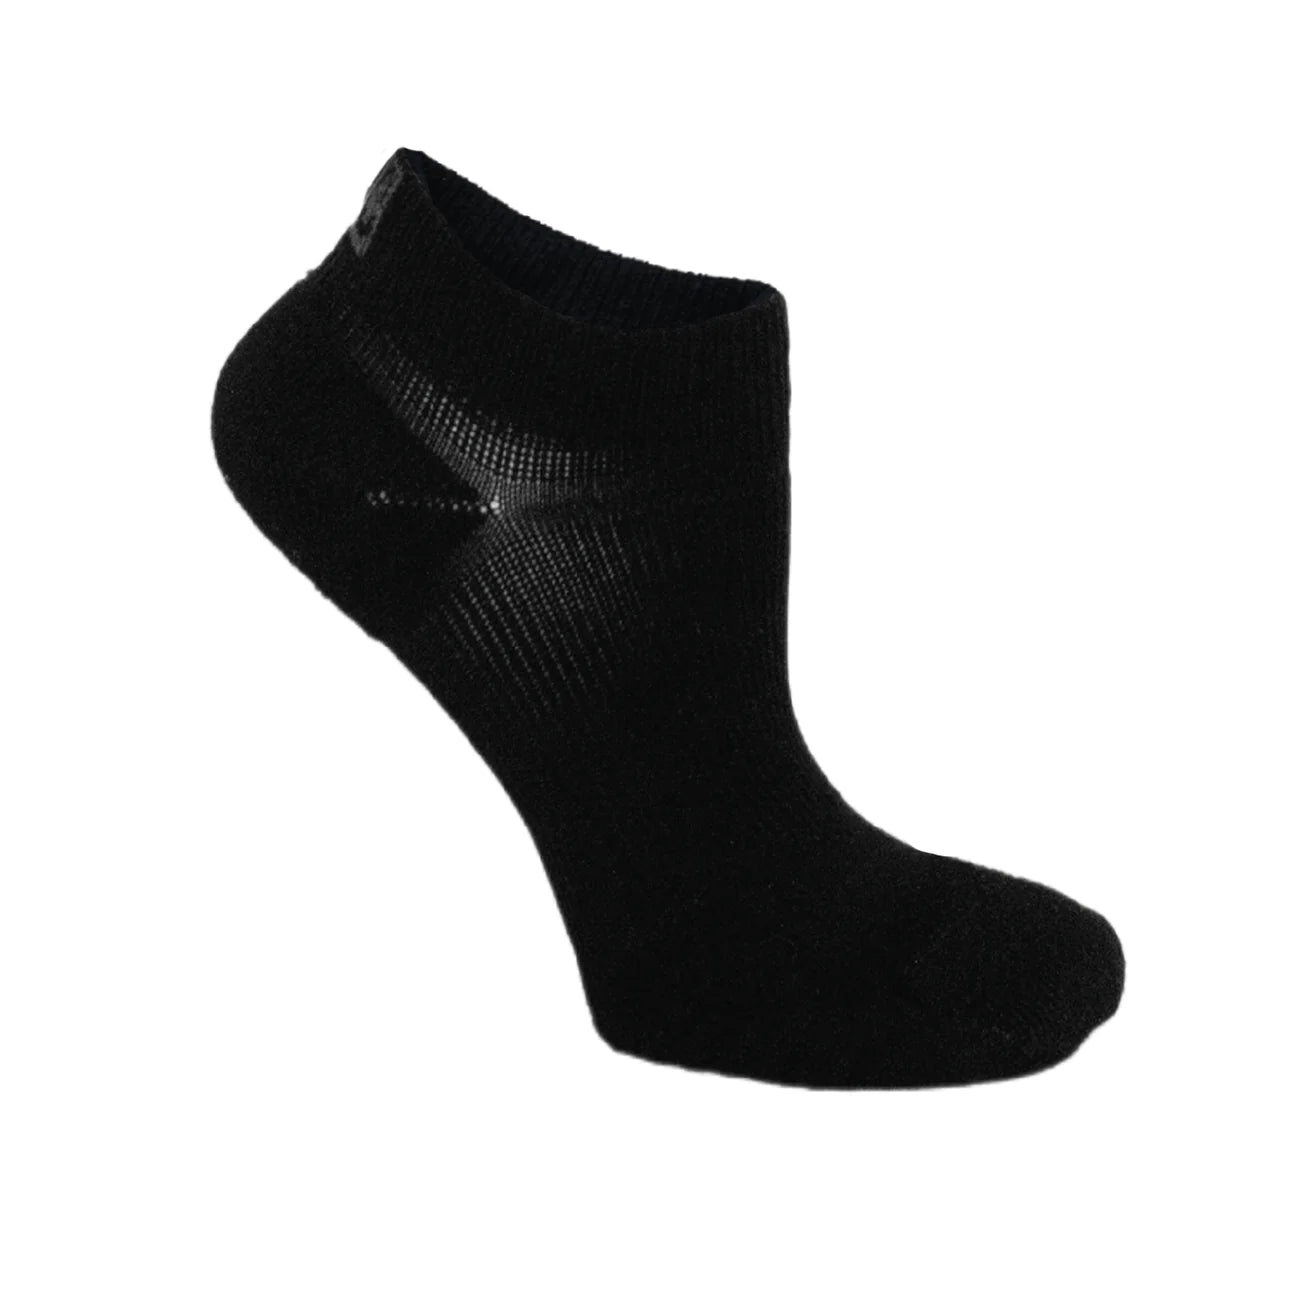 Performance Crew Dance and Recovery Socks